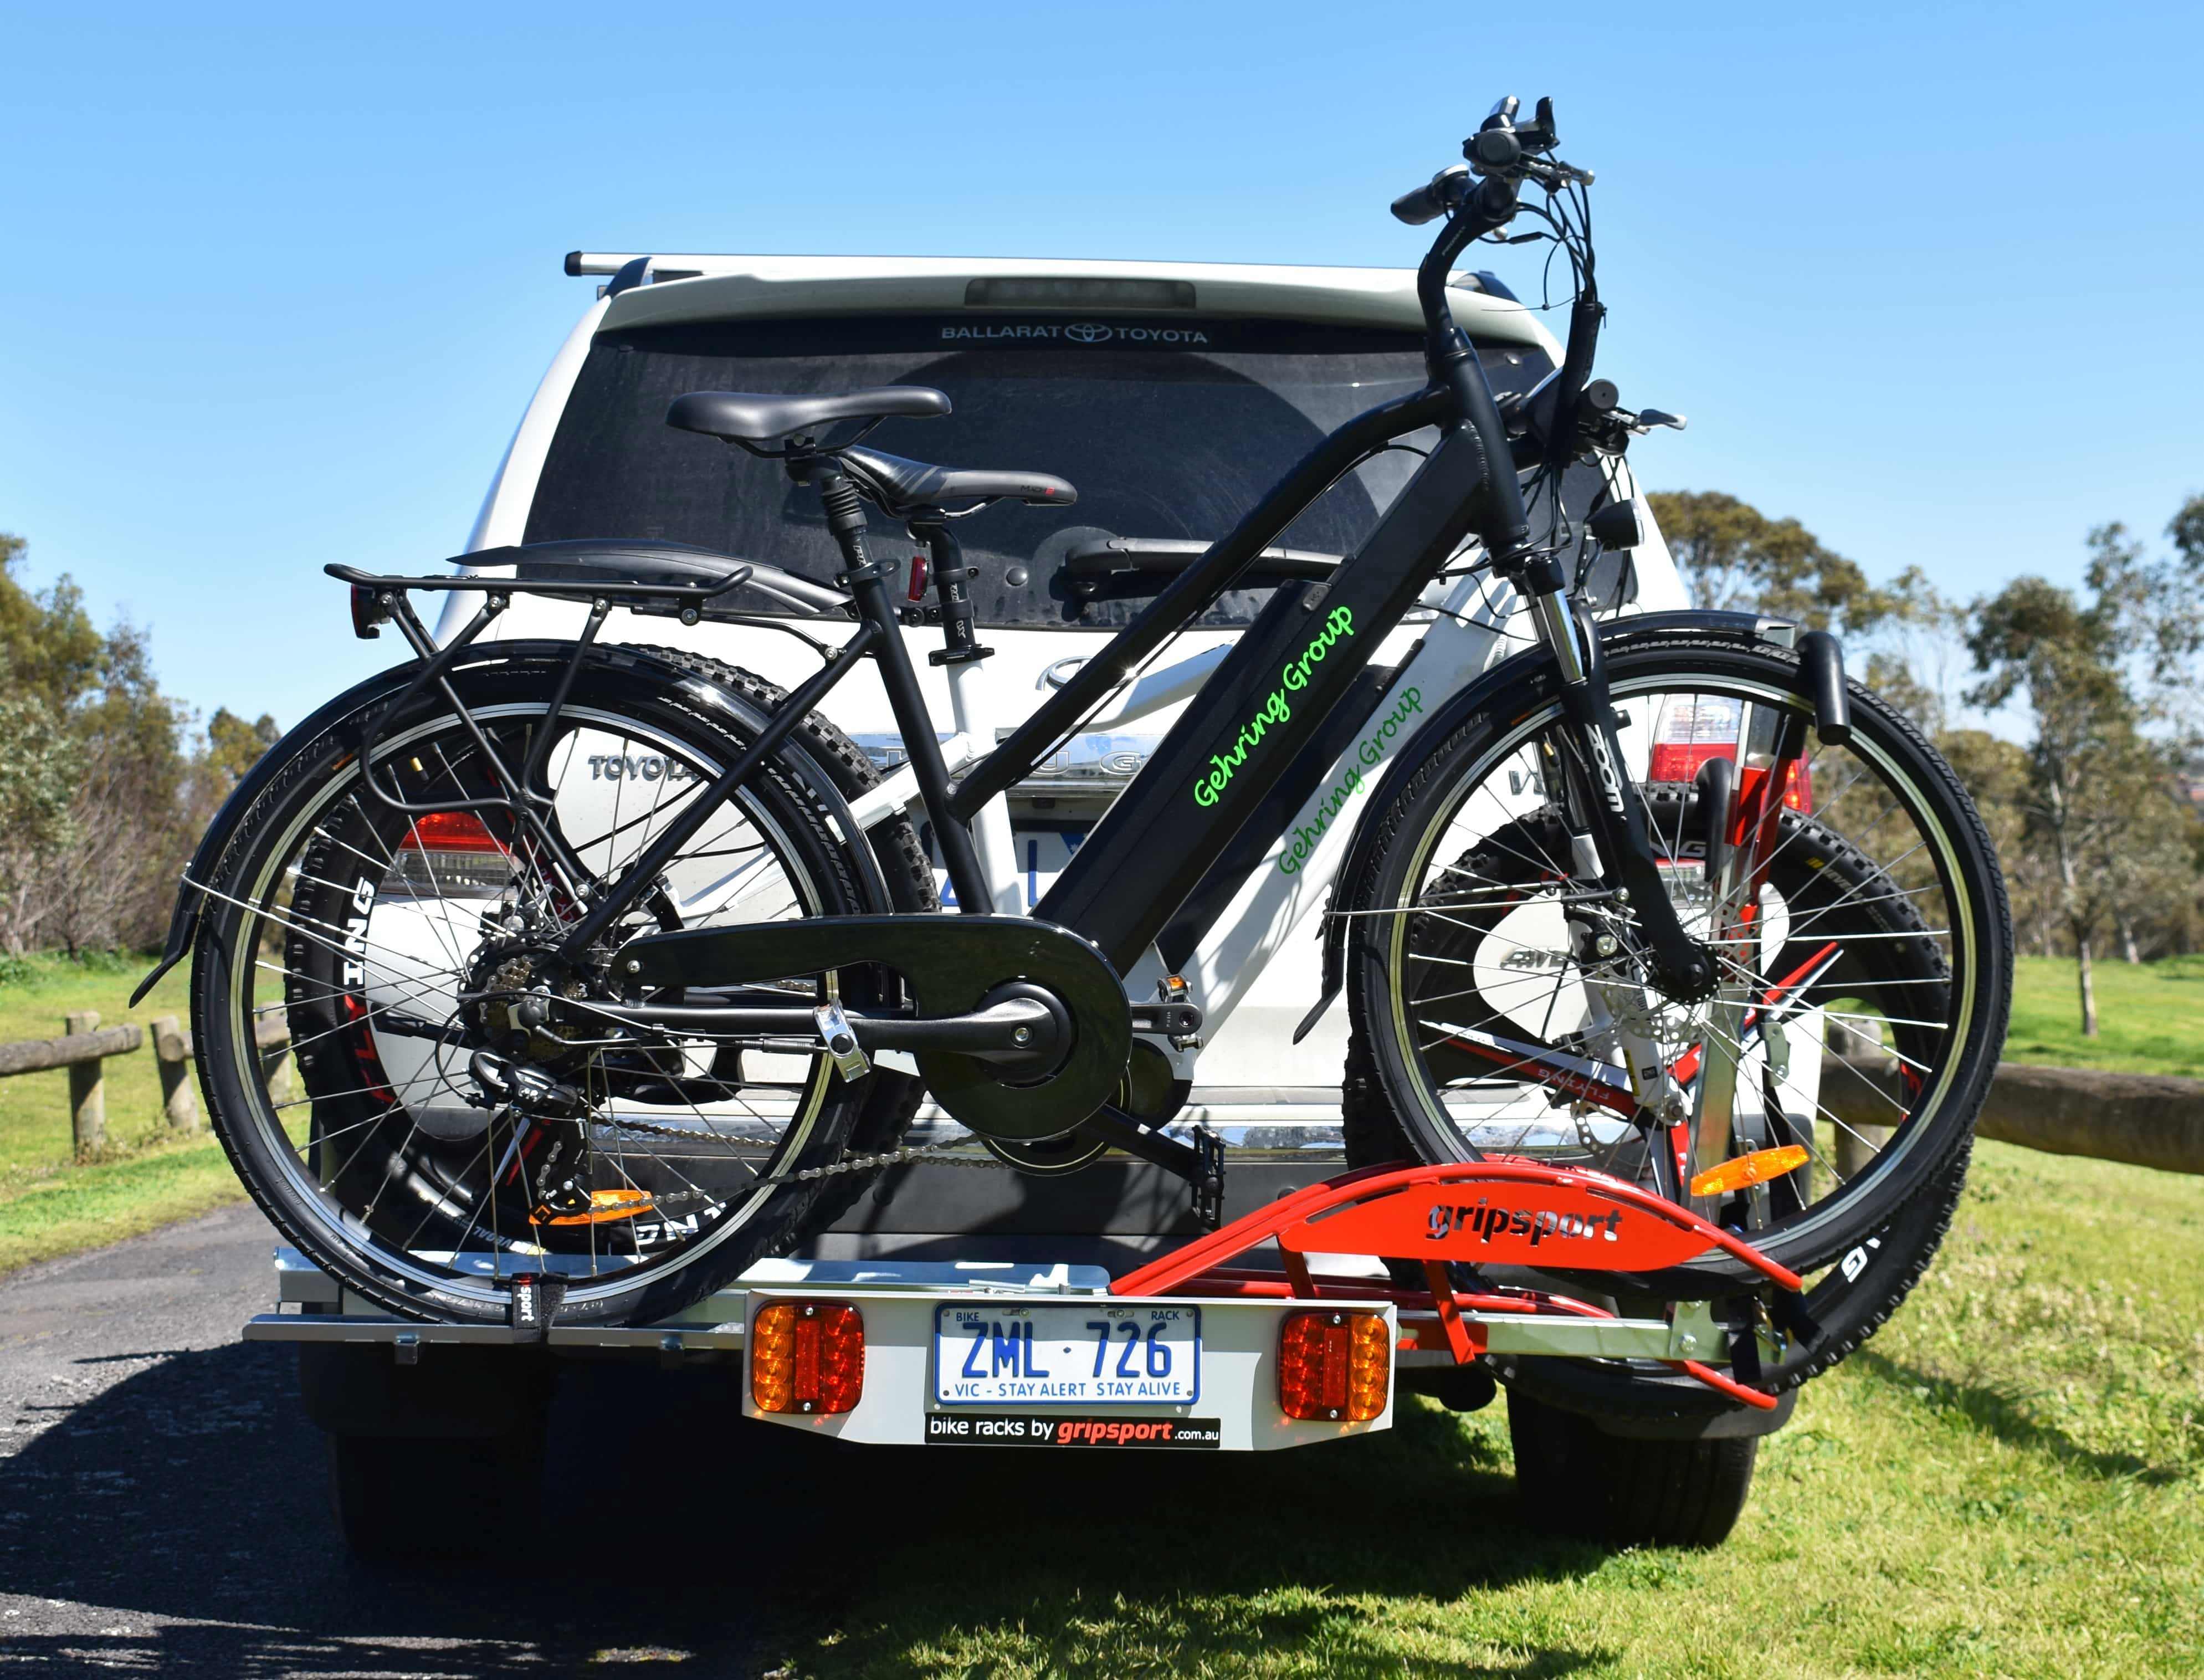 Ebike racks. Safe. Simple to load/unload. Guaranteed for life GripSport